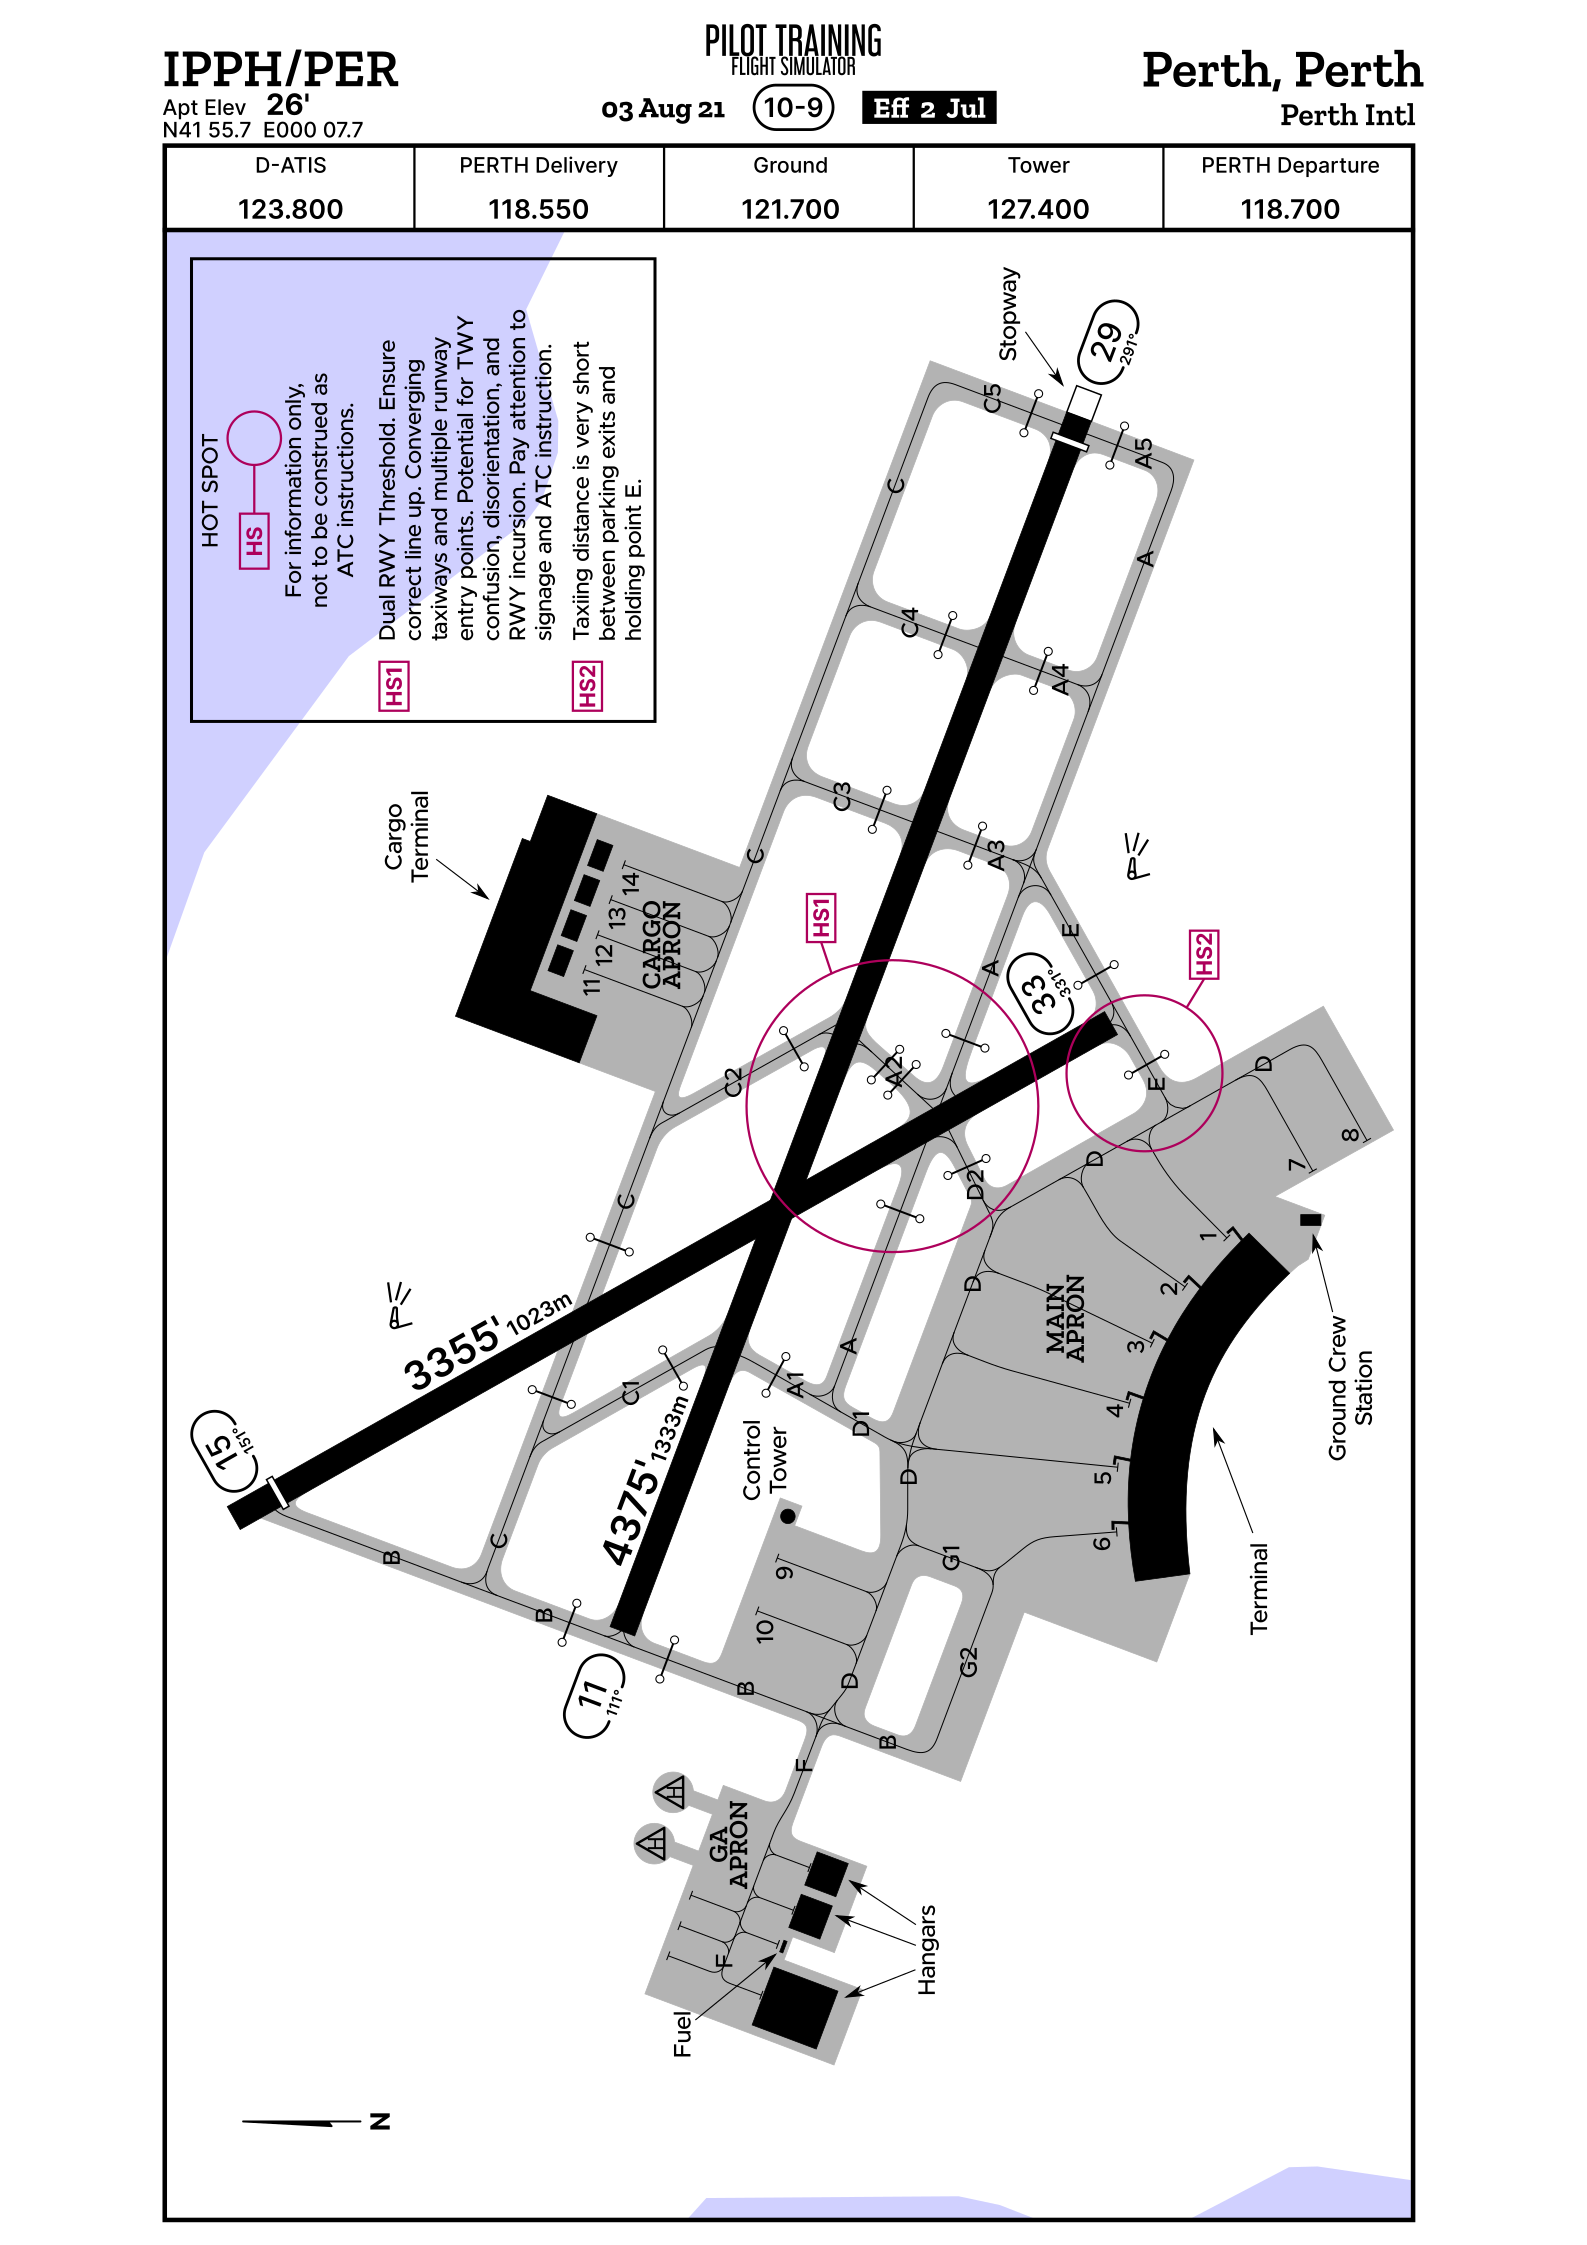 Airport ground chart for the airport IPPH